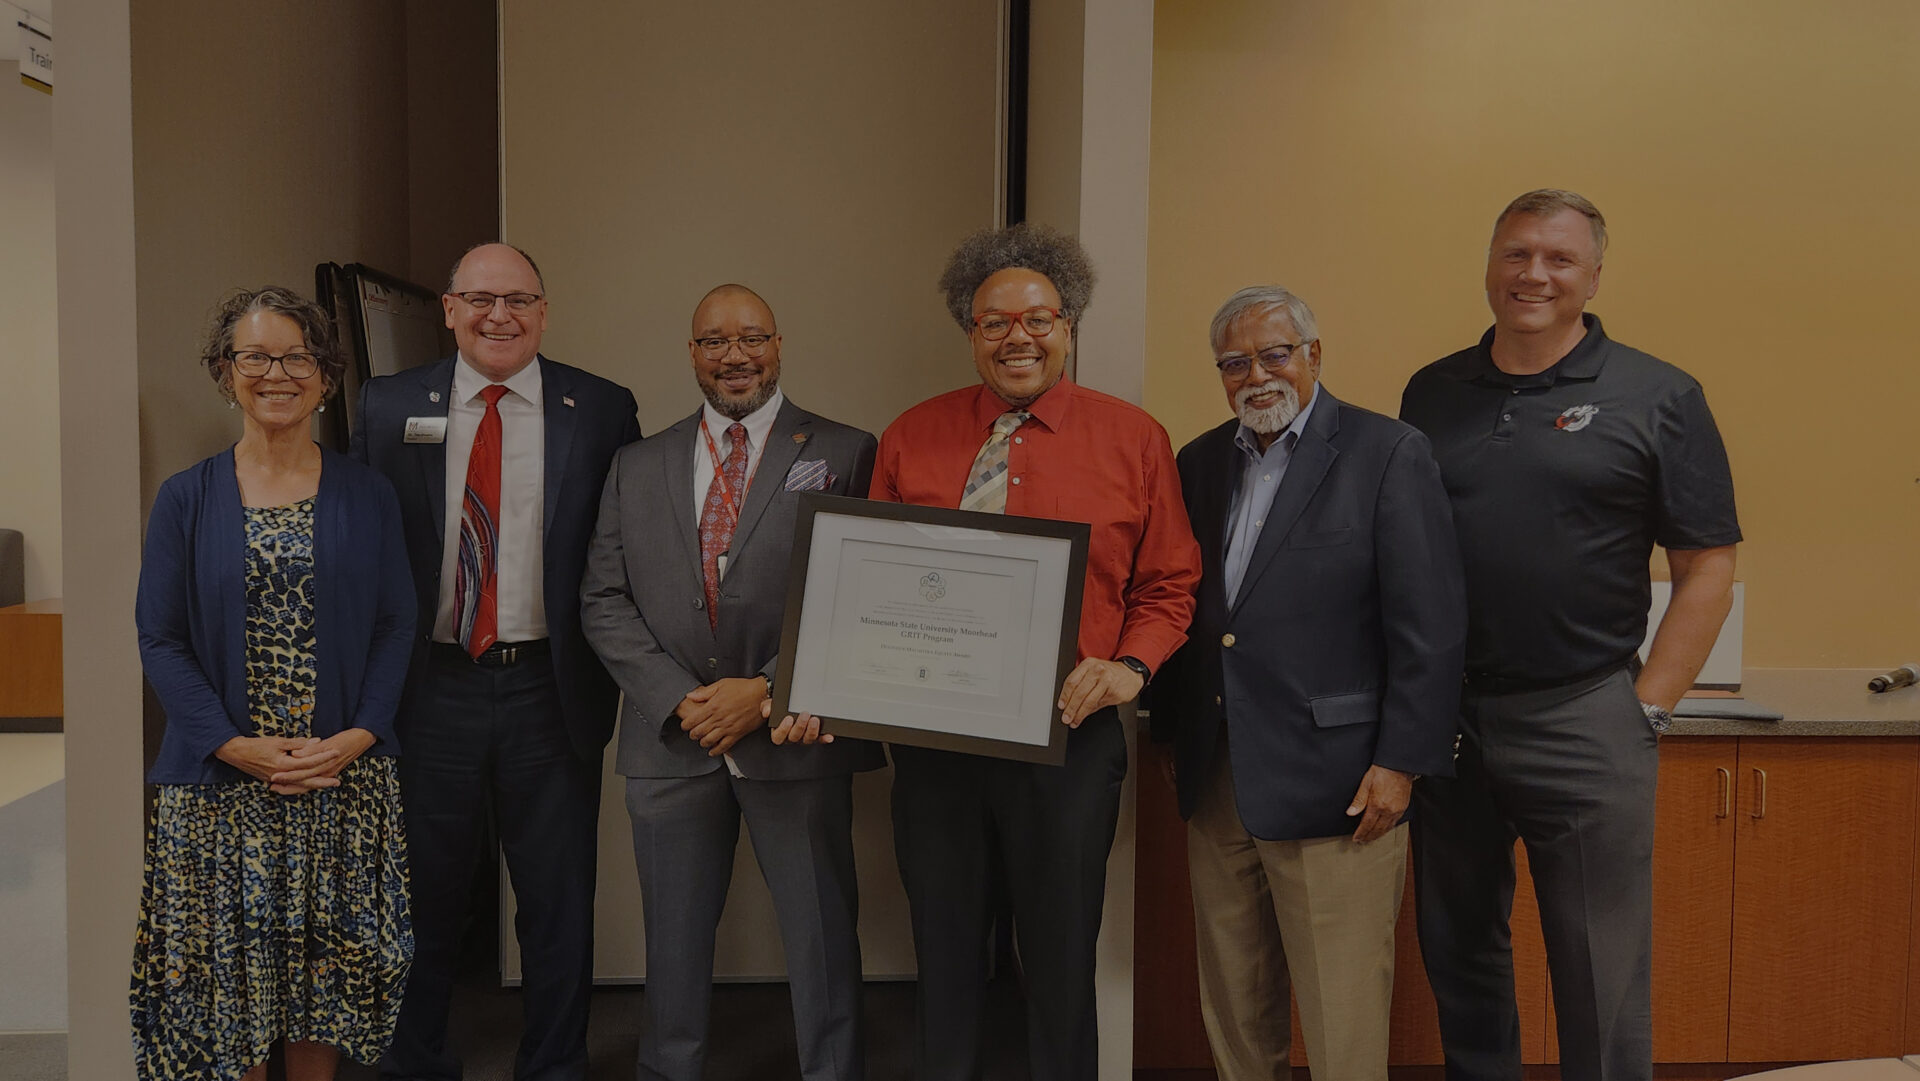 MSUM GRIT Program Recognized with Equity Award